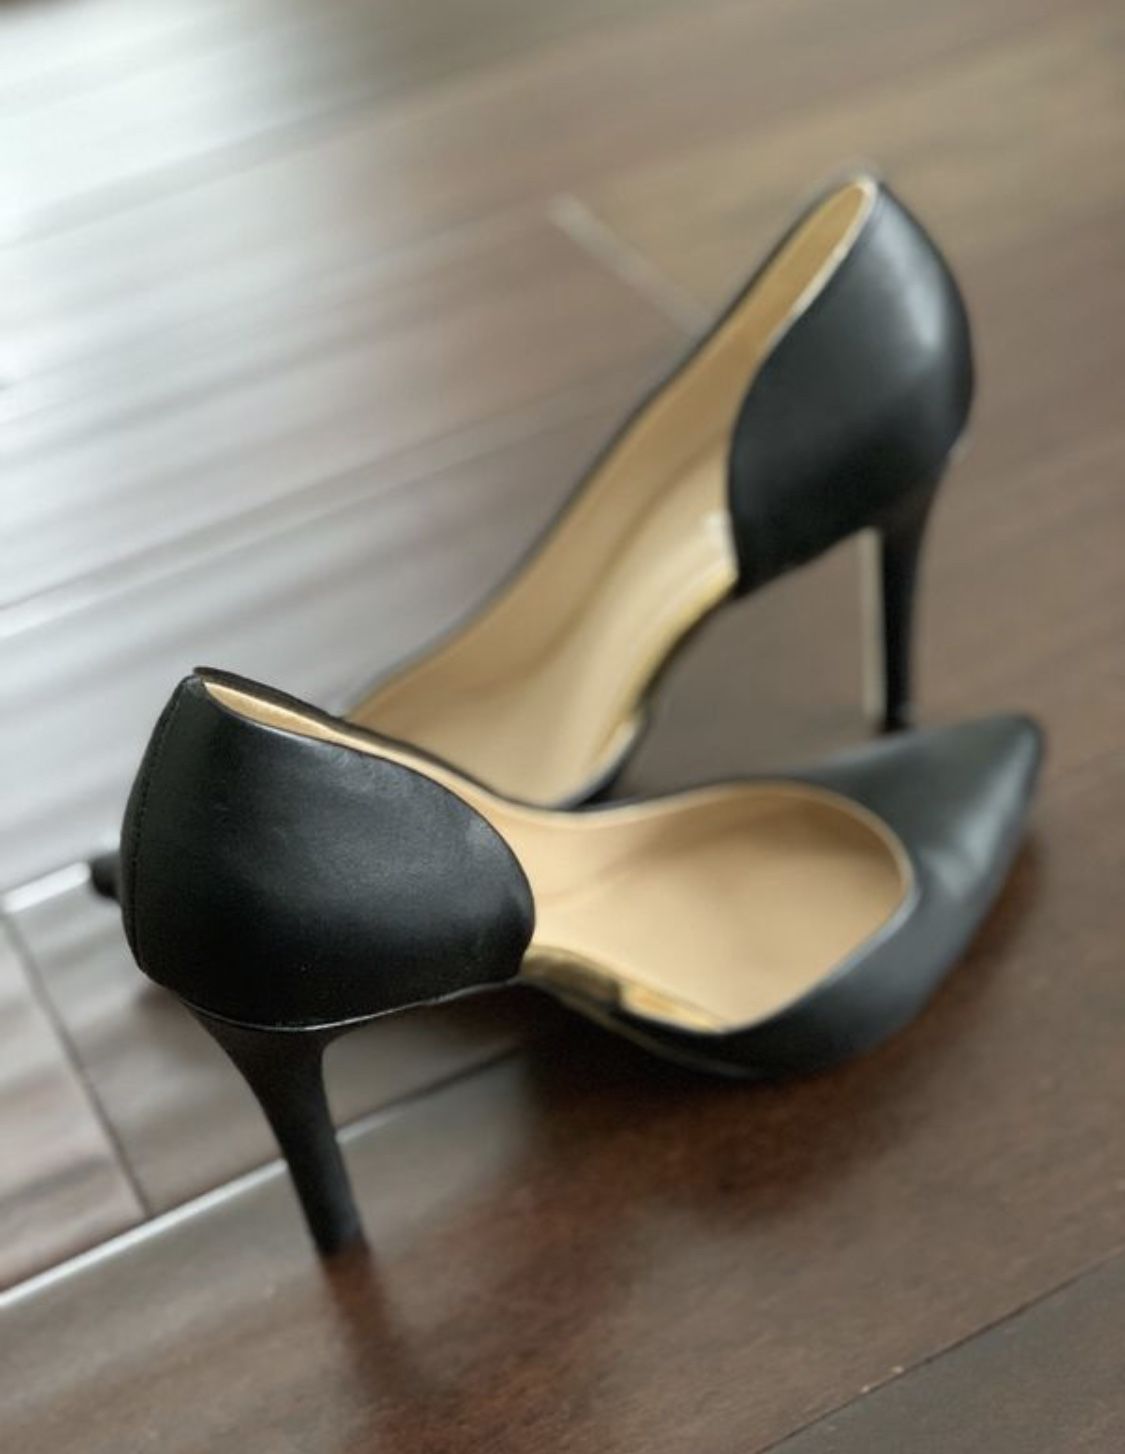 NEW Size 9 high heels shoes